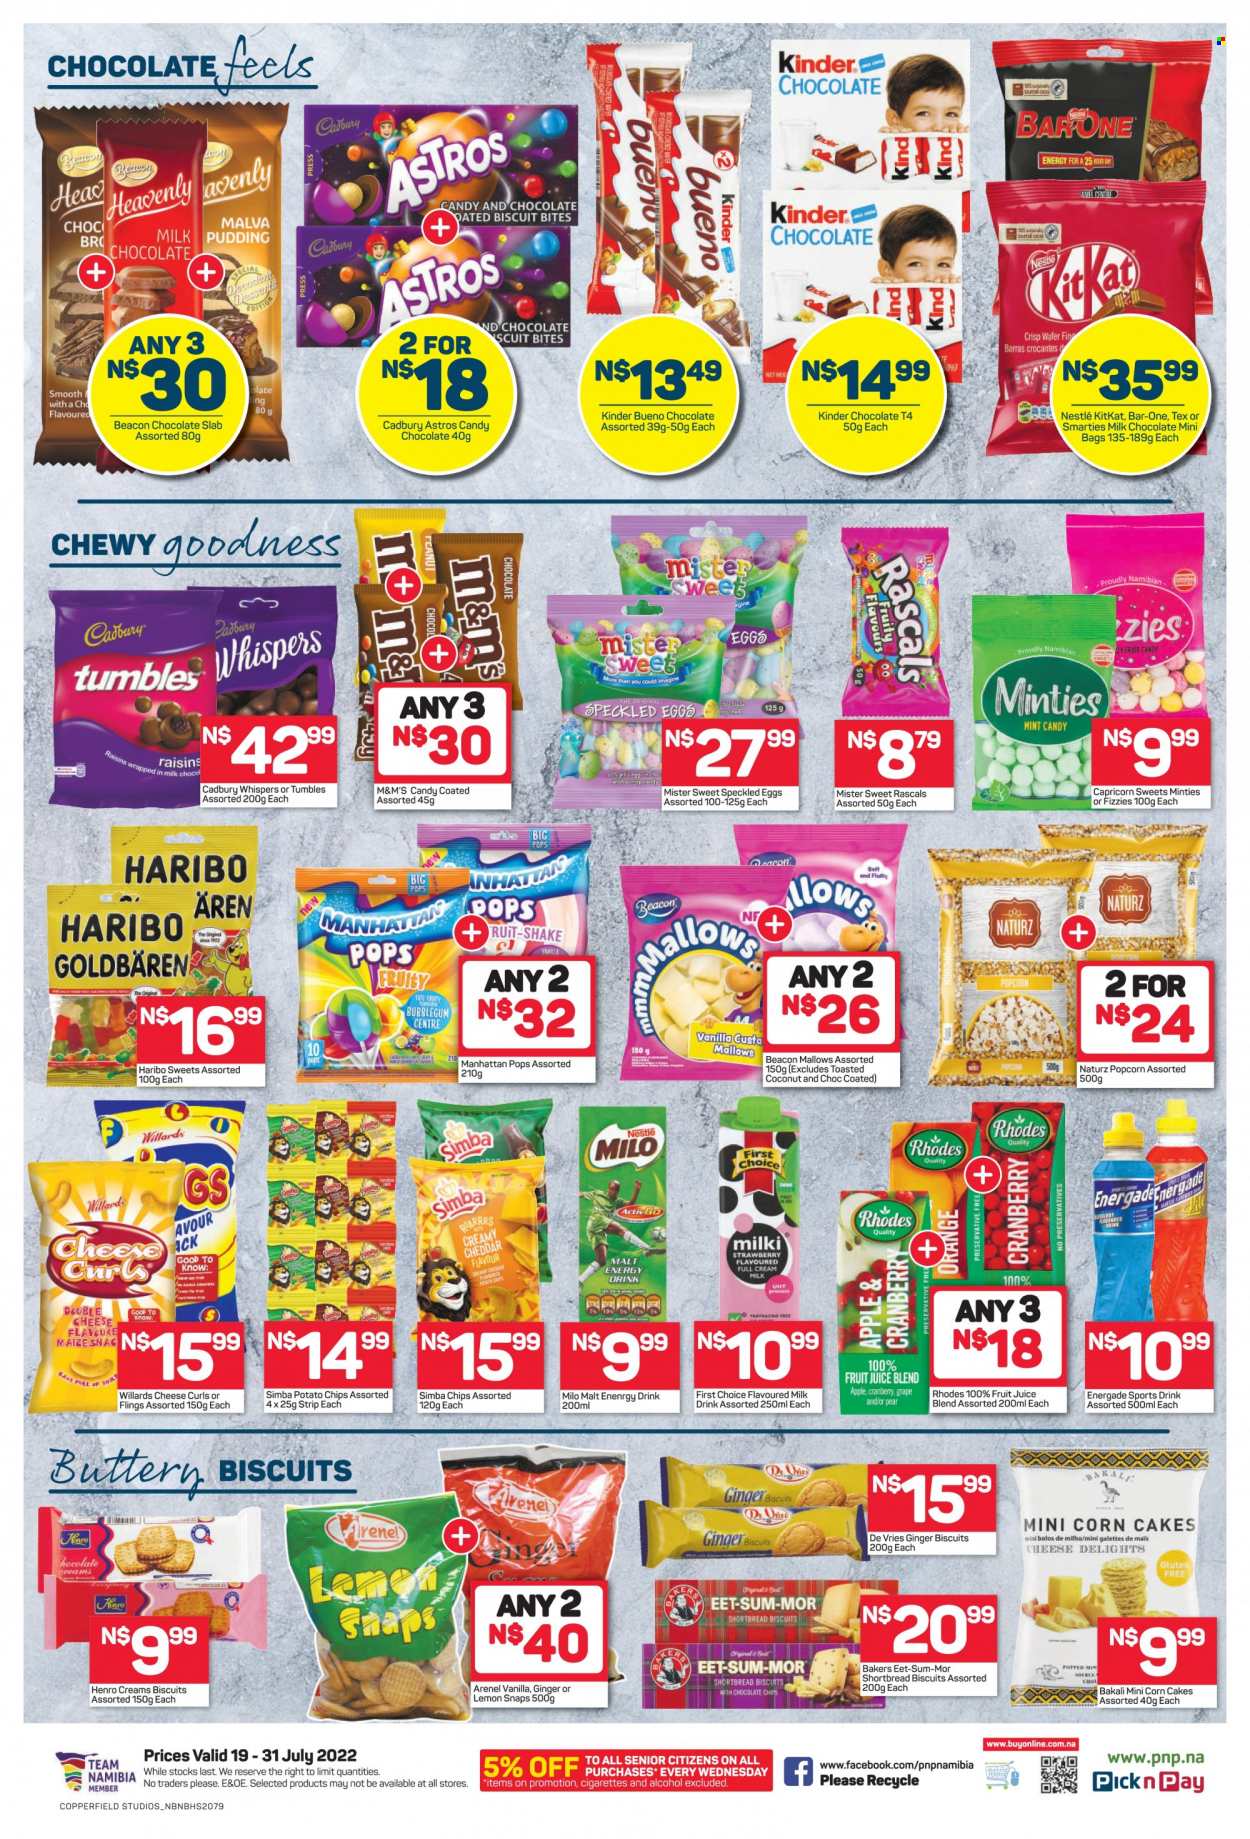 Pick n Pay catalogue  - 19/07/2022 - 31/07/2022 - Sales products - corn, pears, oranges, cheese, pudding, flavoured milk, Milo, shake, eggs, marshmallows, milk chocolate, Nestlé, wafers, Haribo, KitKat, jelly, bubblegum, tumbles, M&M's, Smarties, Kinder Bueno, biscuit, Cadbury, potato chips, Simba, popcorn, raisins, dried fruit, energy drink, fruit juice, juice, alcohol, Bakers. Page 2.